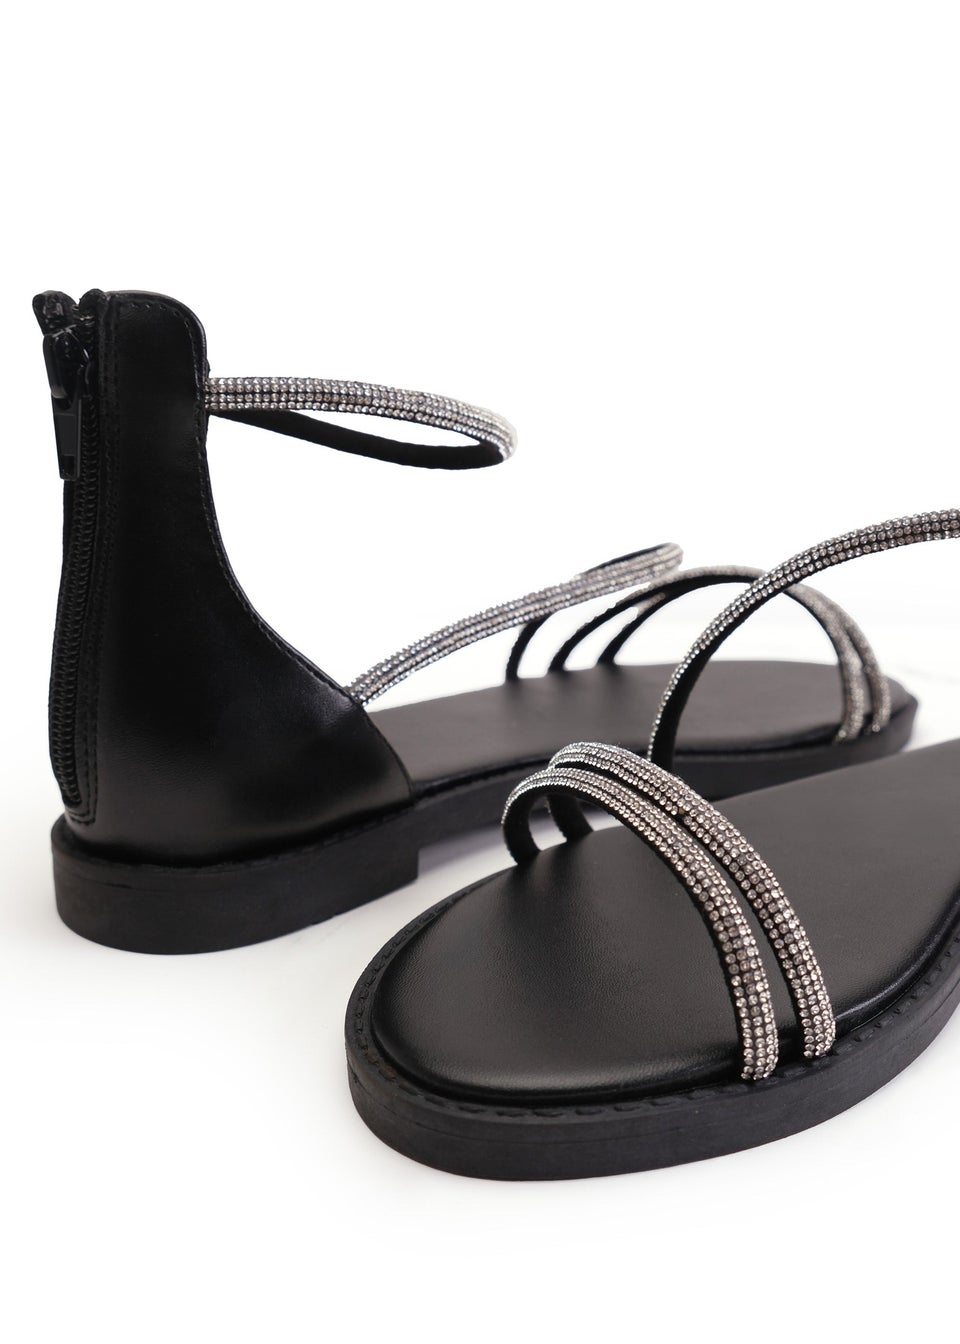 Where's That From Black Pu Palmira Diamante Flatform Strappy Sandals